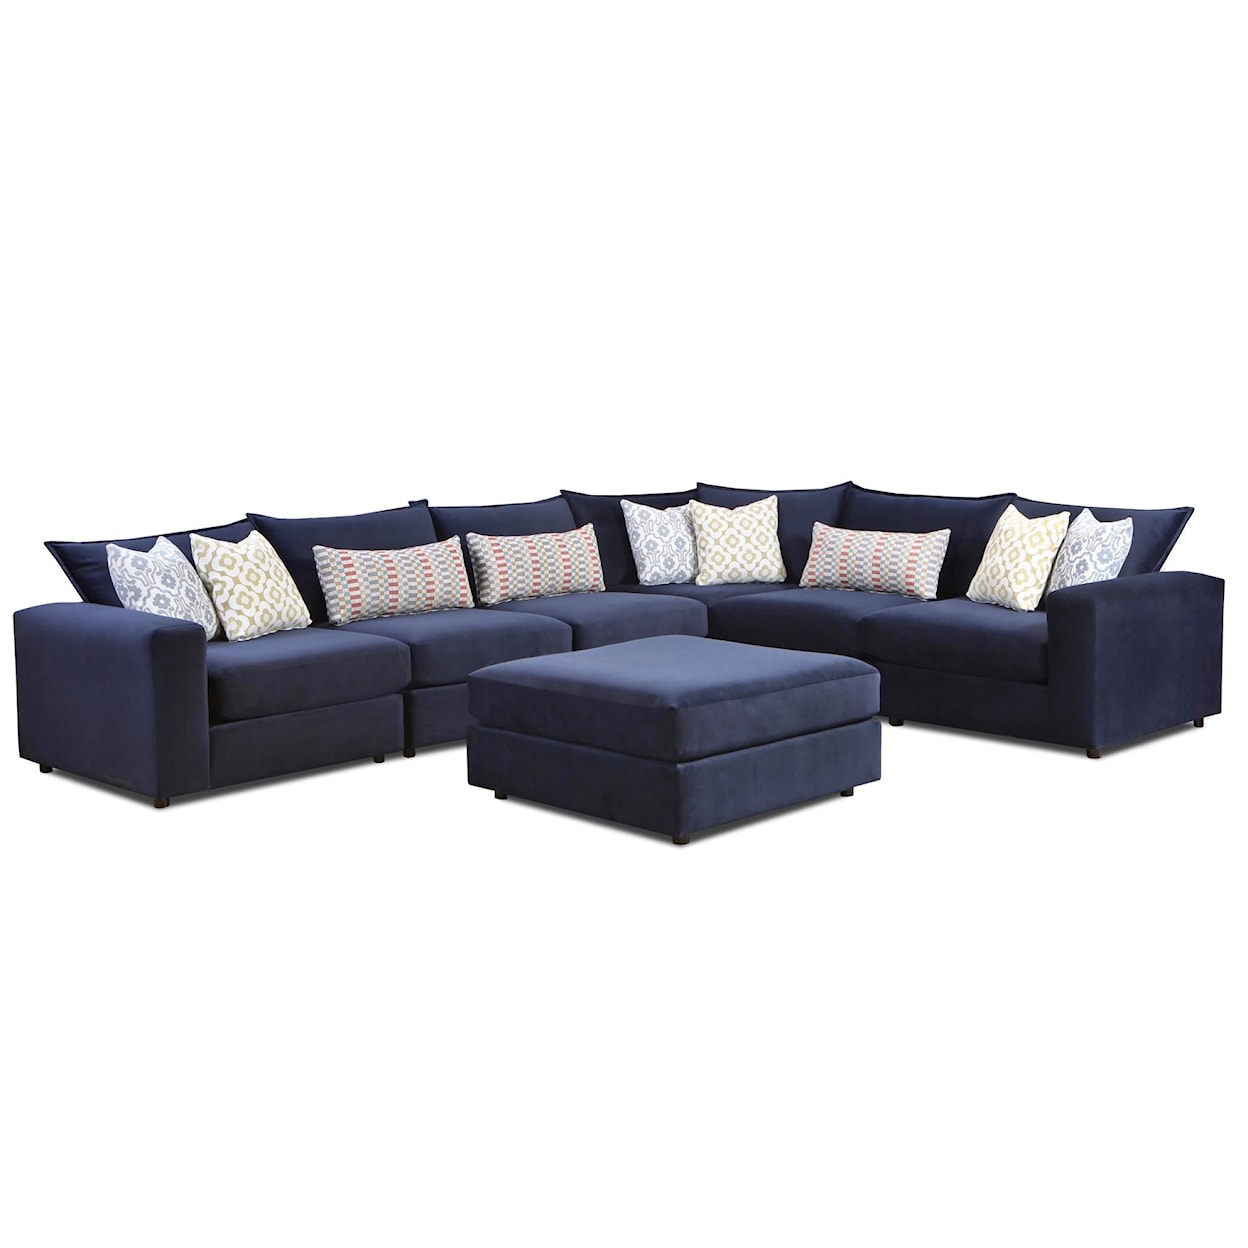 Fusion Furniture 7000 MARQUIS Modular Sectional